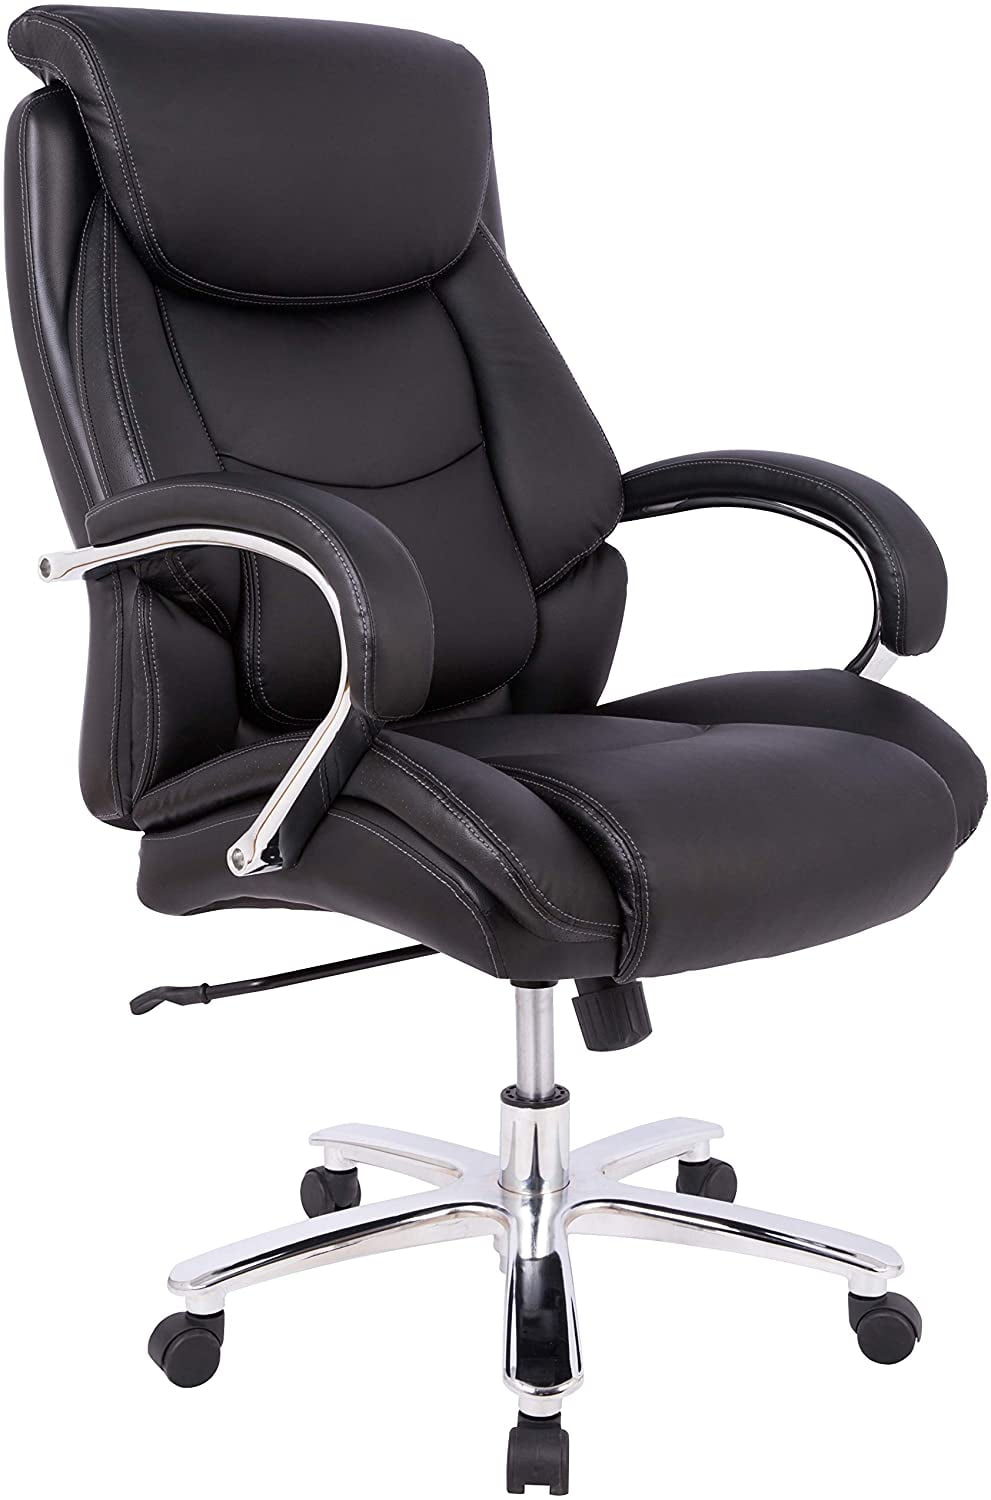 Big & Tall Executive Office Desk Chair Adjustable with